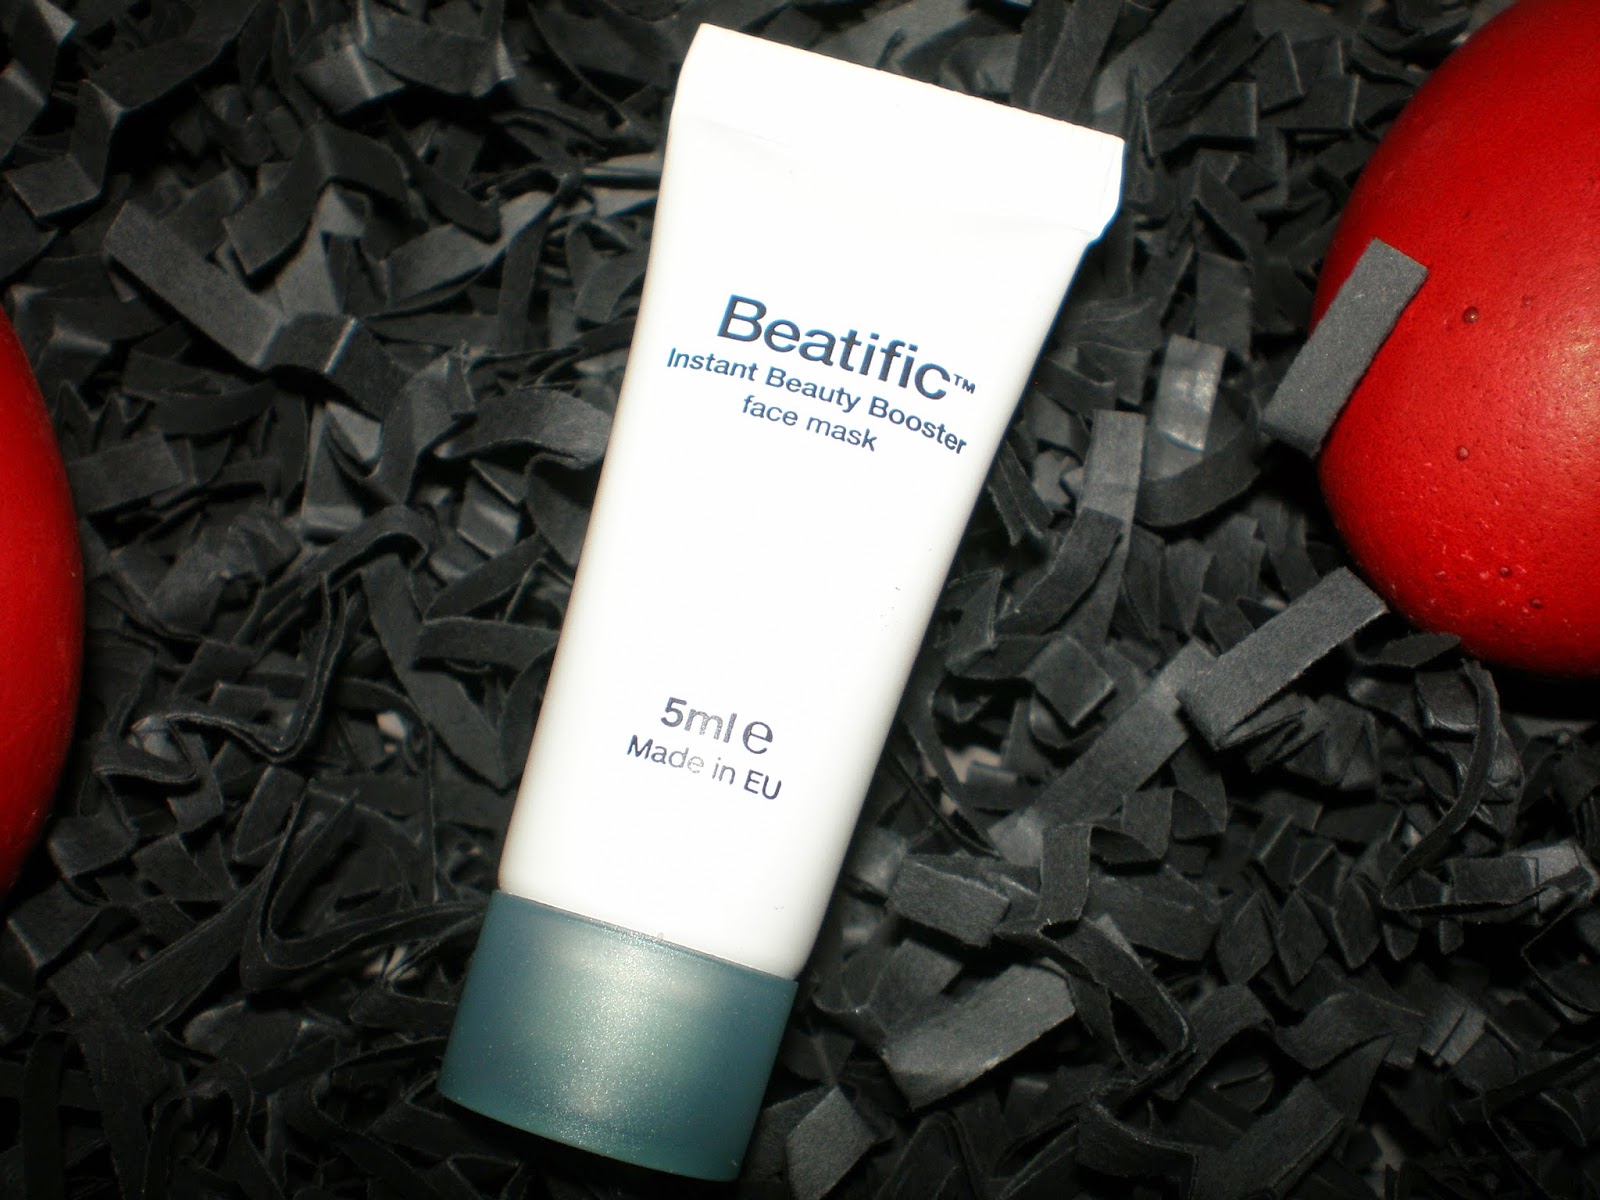 Beatific Instant Beauty Booster face mask